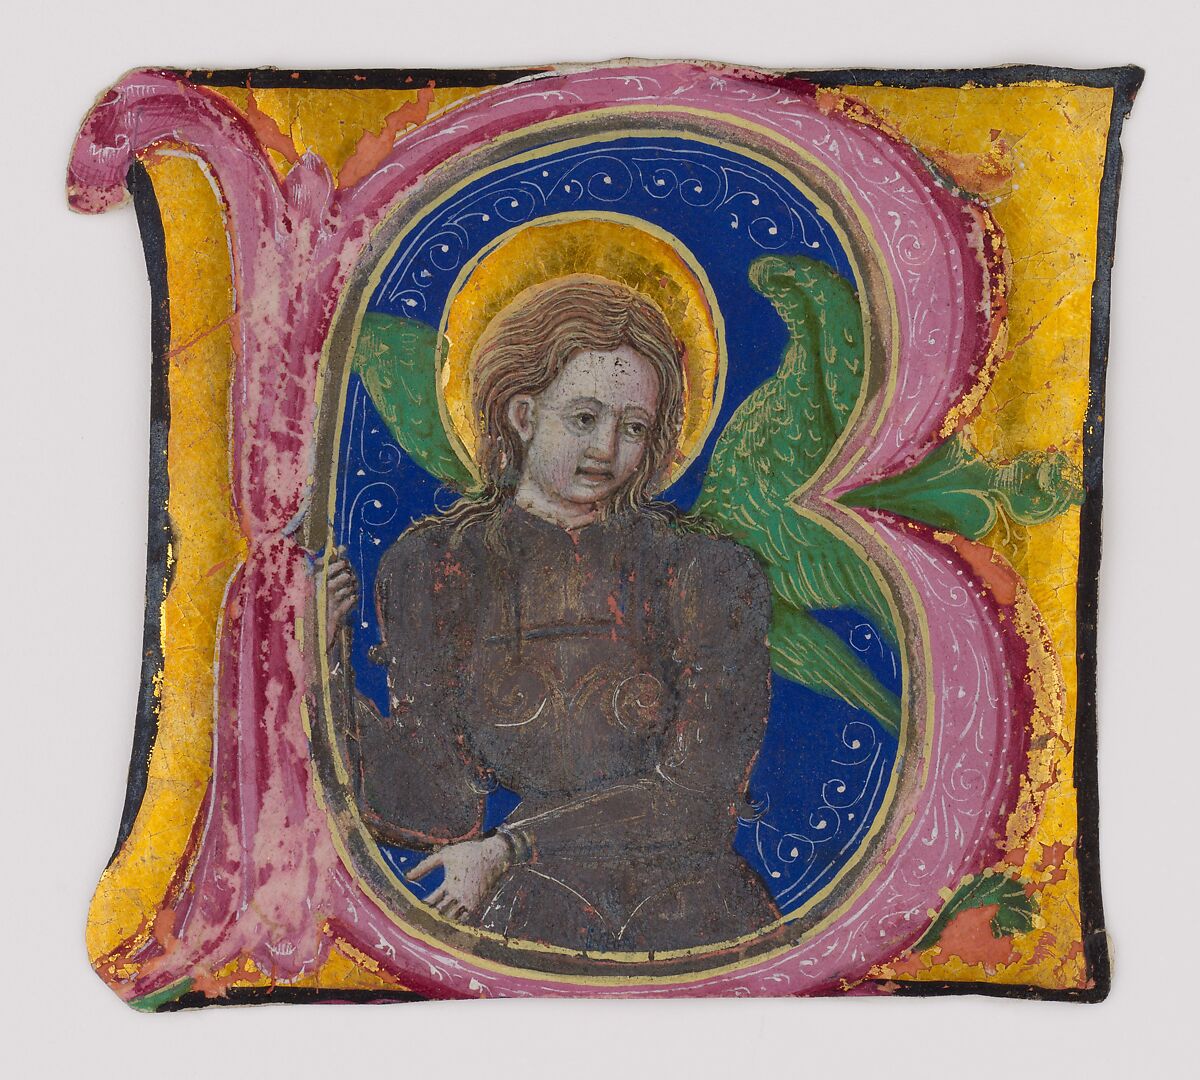 Manuscript Leaf Cutting from a Choir Book with an Illuminated Initial B and the Archangel Michael, Tempera, gold, silver, ink on parchment, Italian 